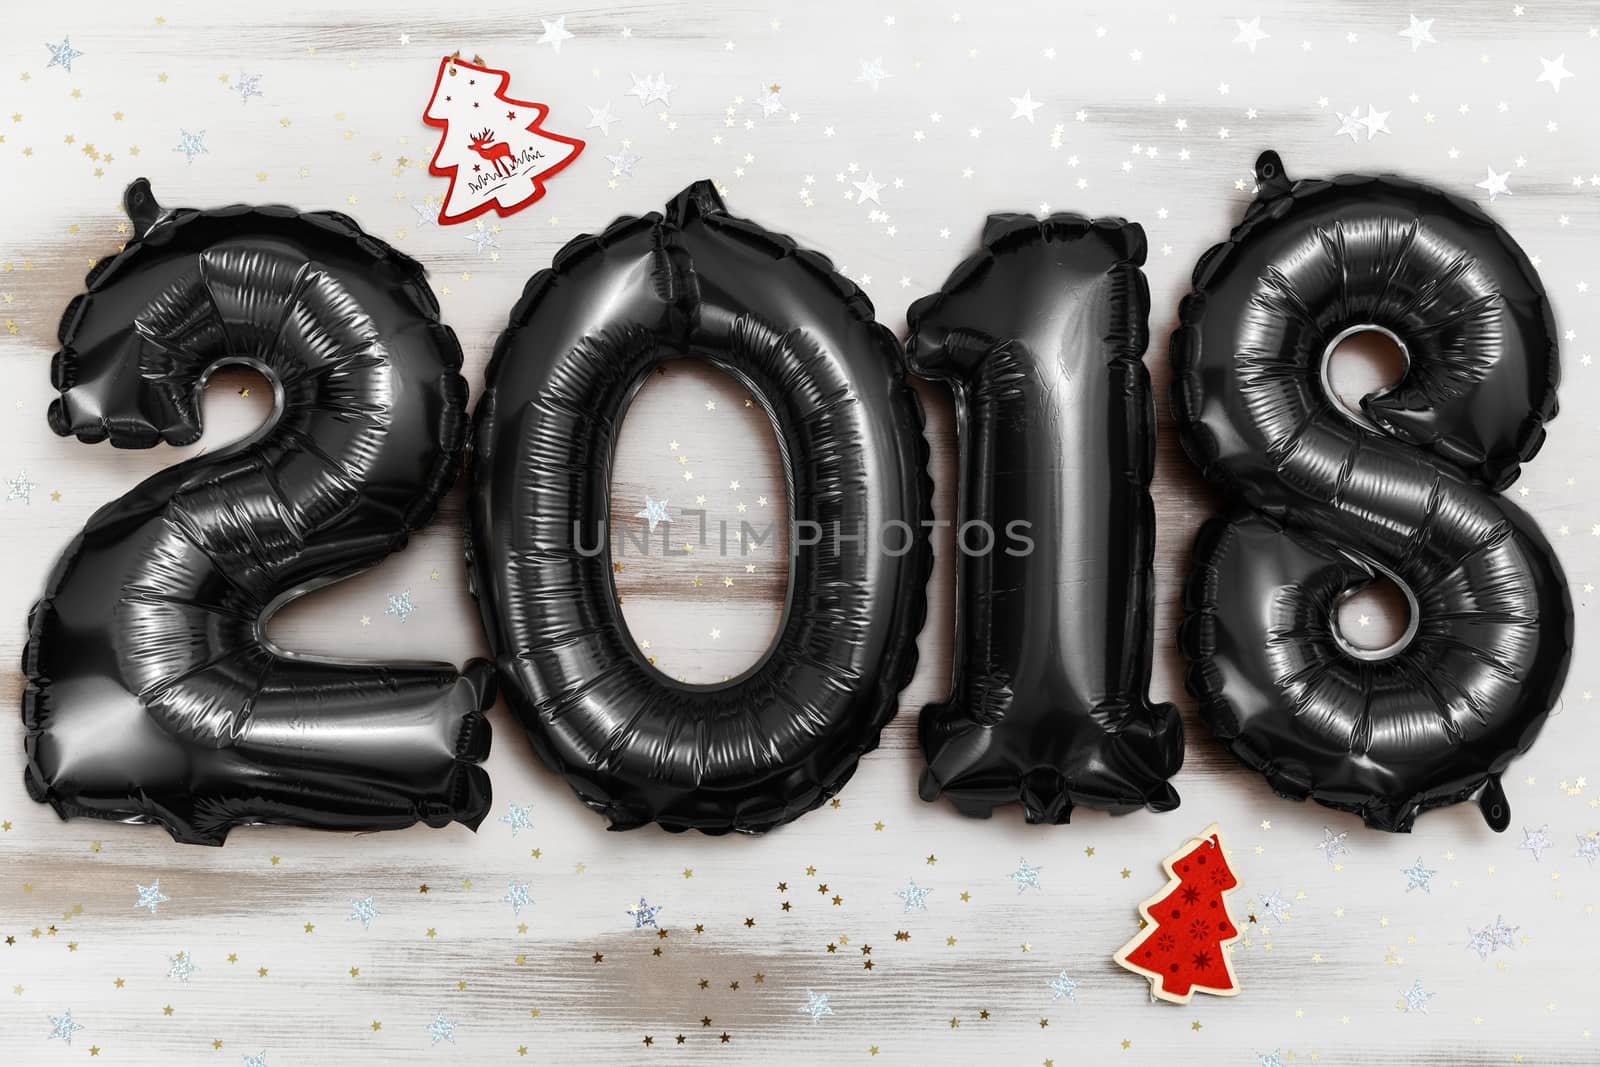 Bright black balloons figures 2018, New Year Balloons with glitter stars on white wood table background. Christmas and new year celebration